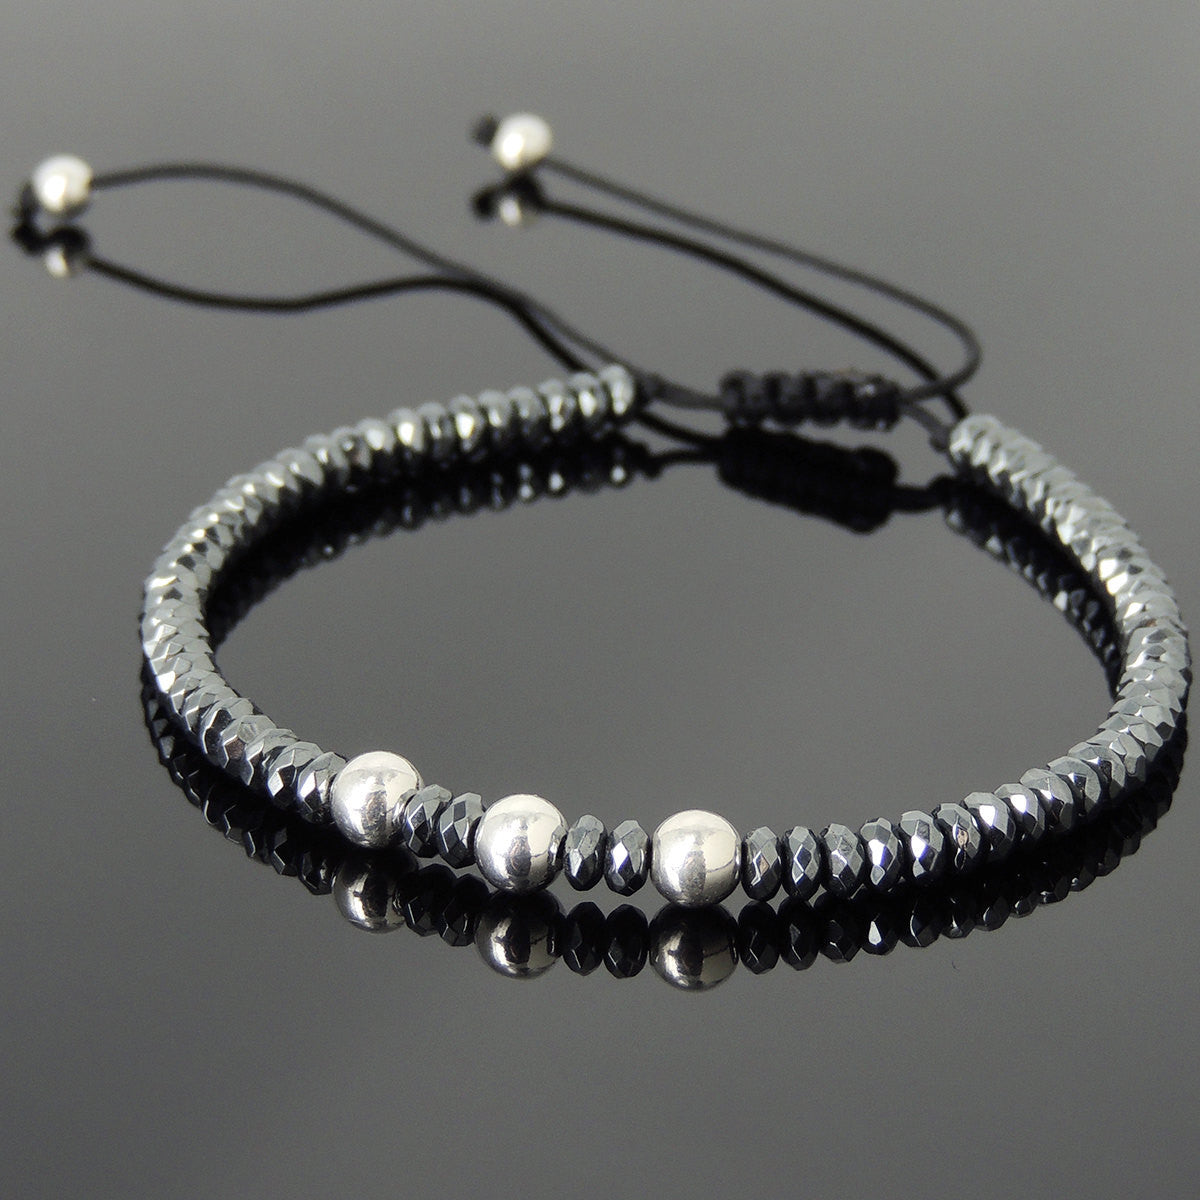 2x4mm Faceted Rondel Hematite Adjustable Braided Bracelet with S925 Sterling Silver 3mm Seamless Beads - Handmade by Gem & Silver BR820